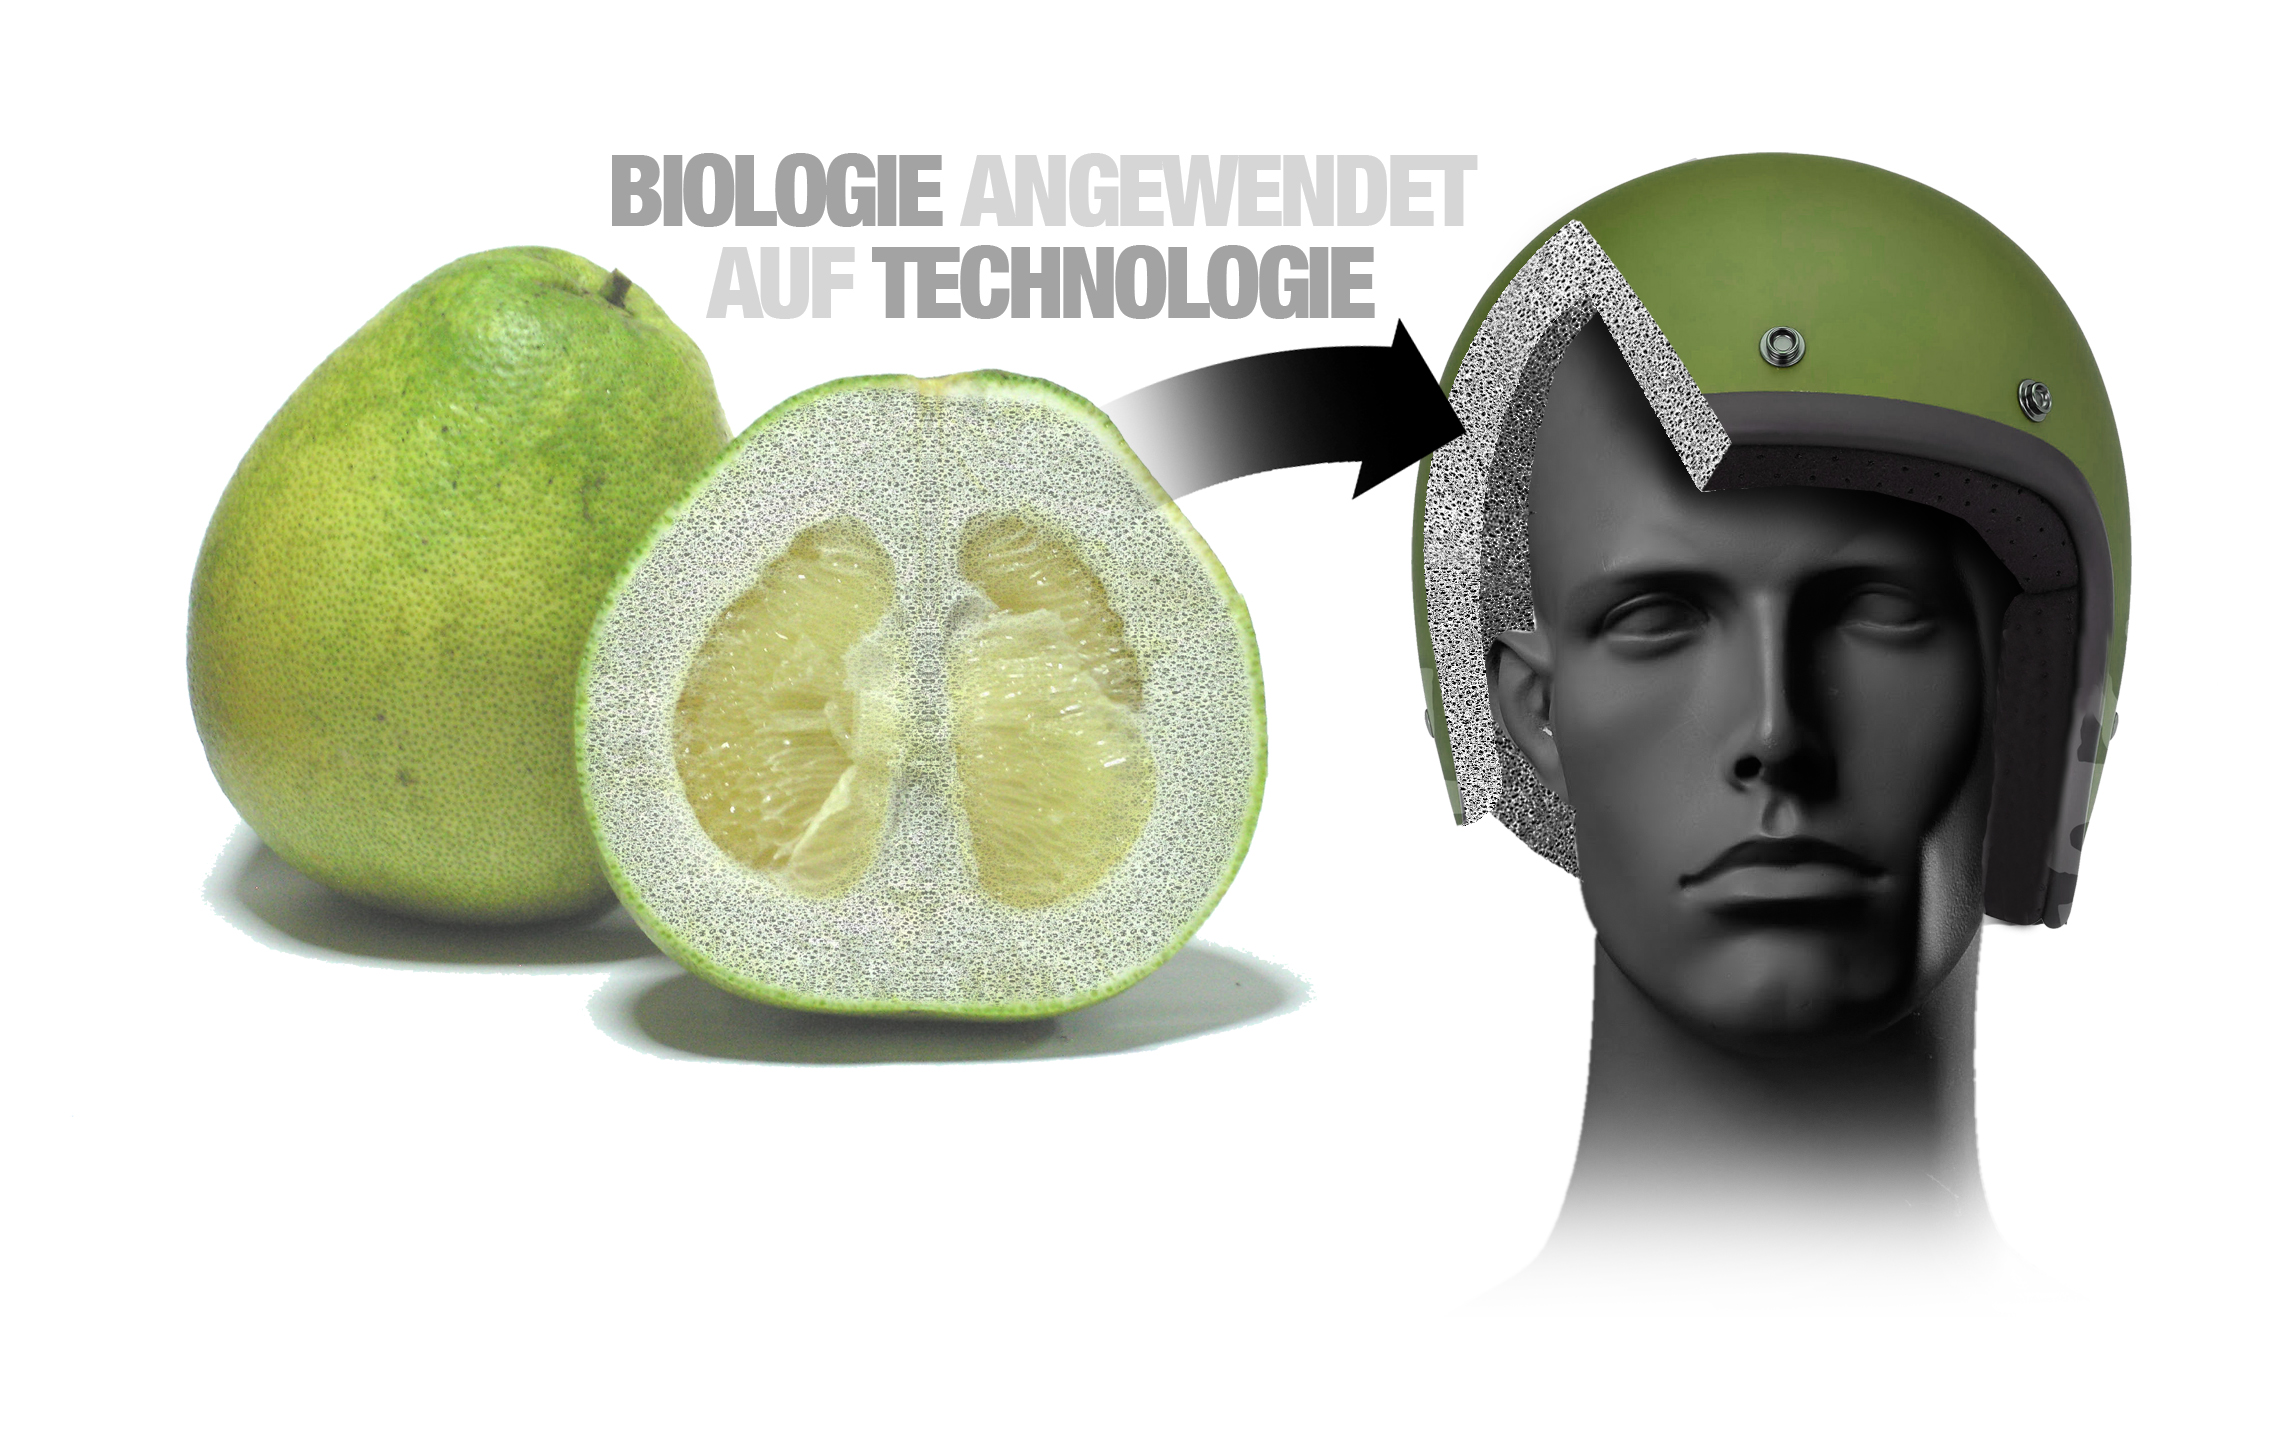 Inspired by nature: New body protection for BMW employees